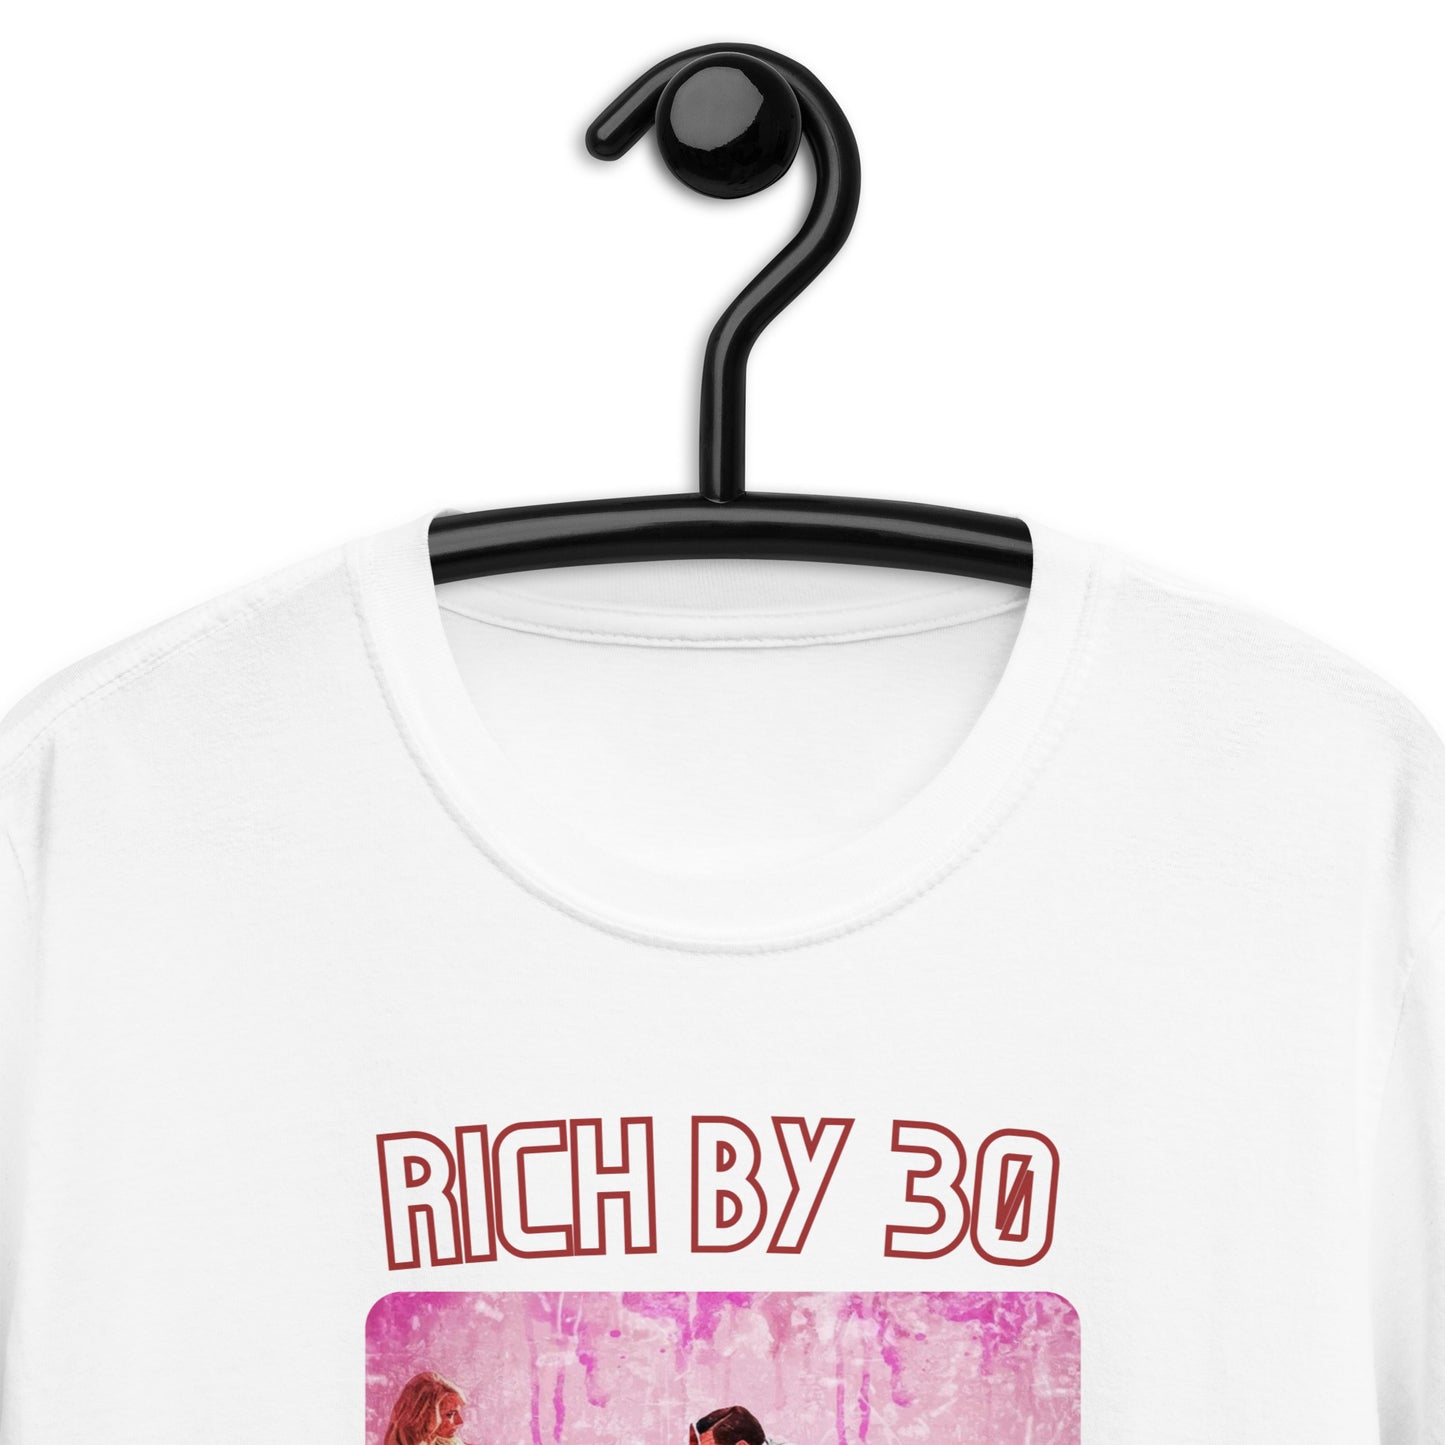 Rich by 30